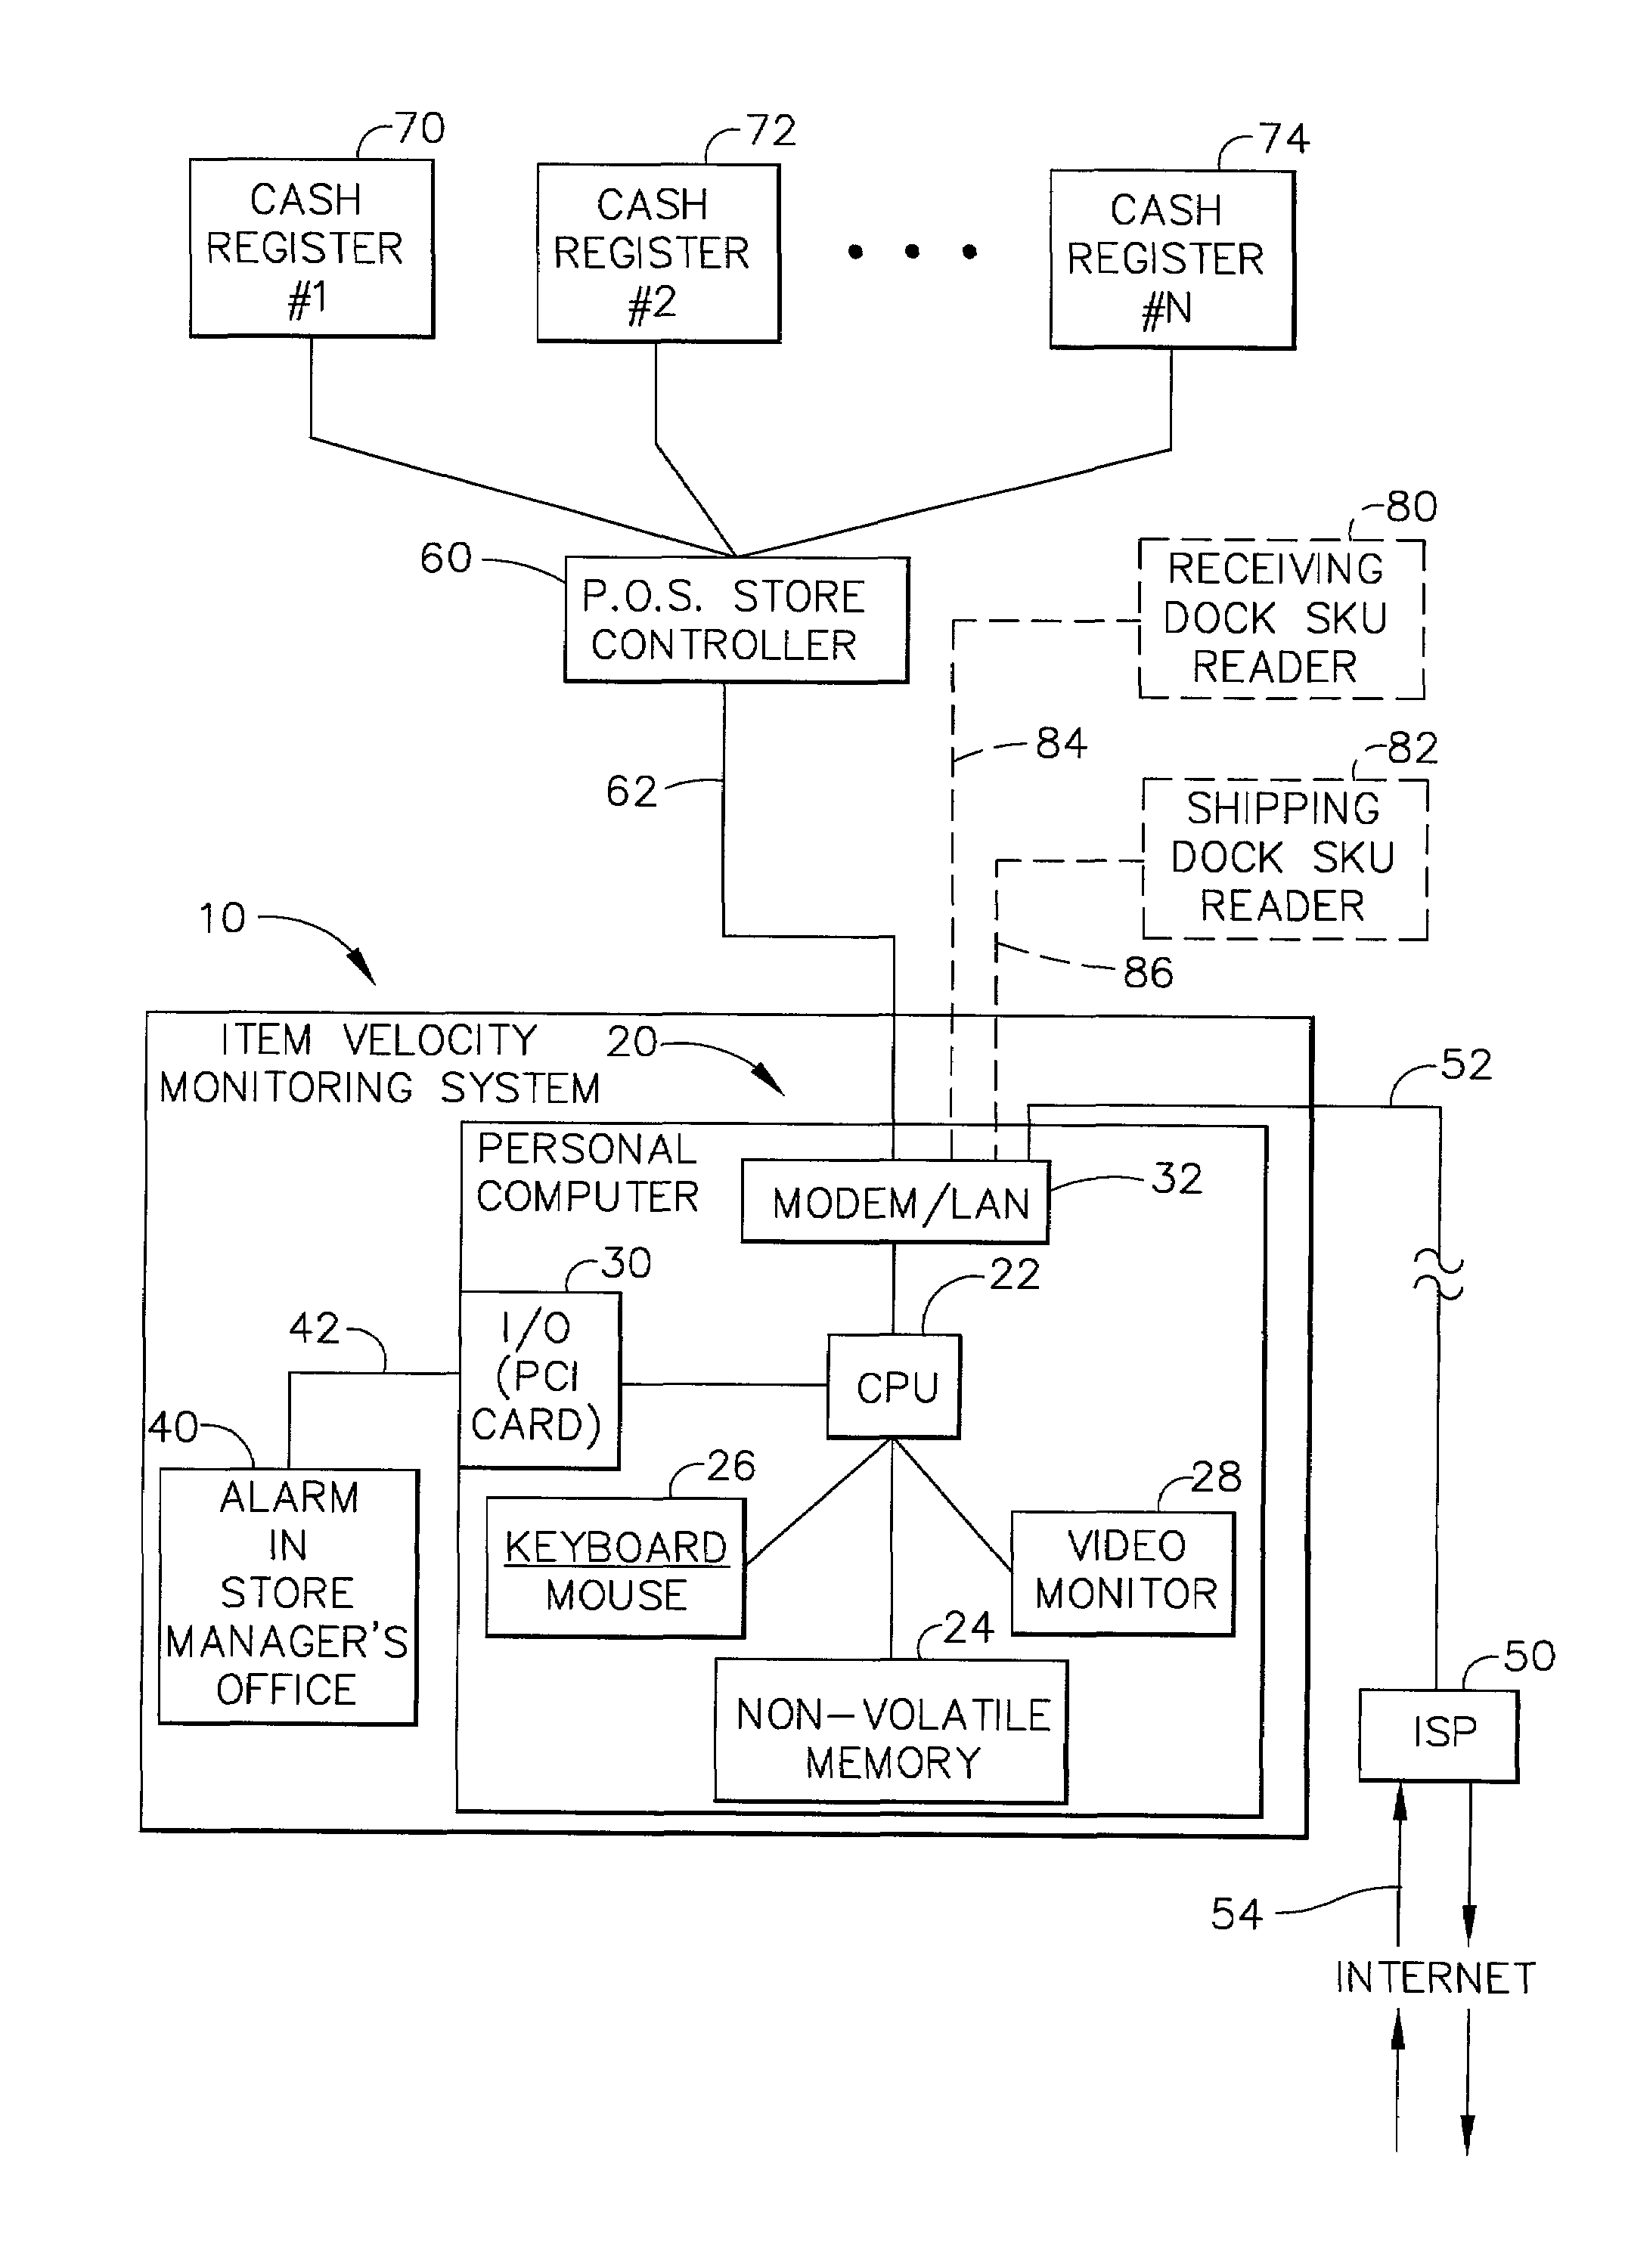 Method and apparatus for monitoring the flow of items through a store or warehouse